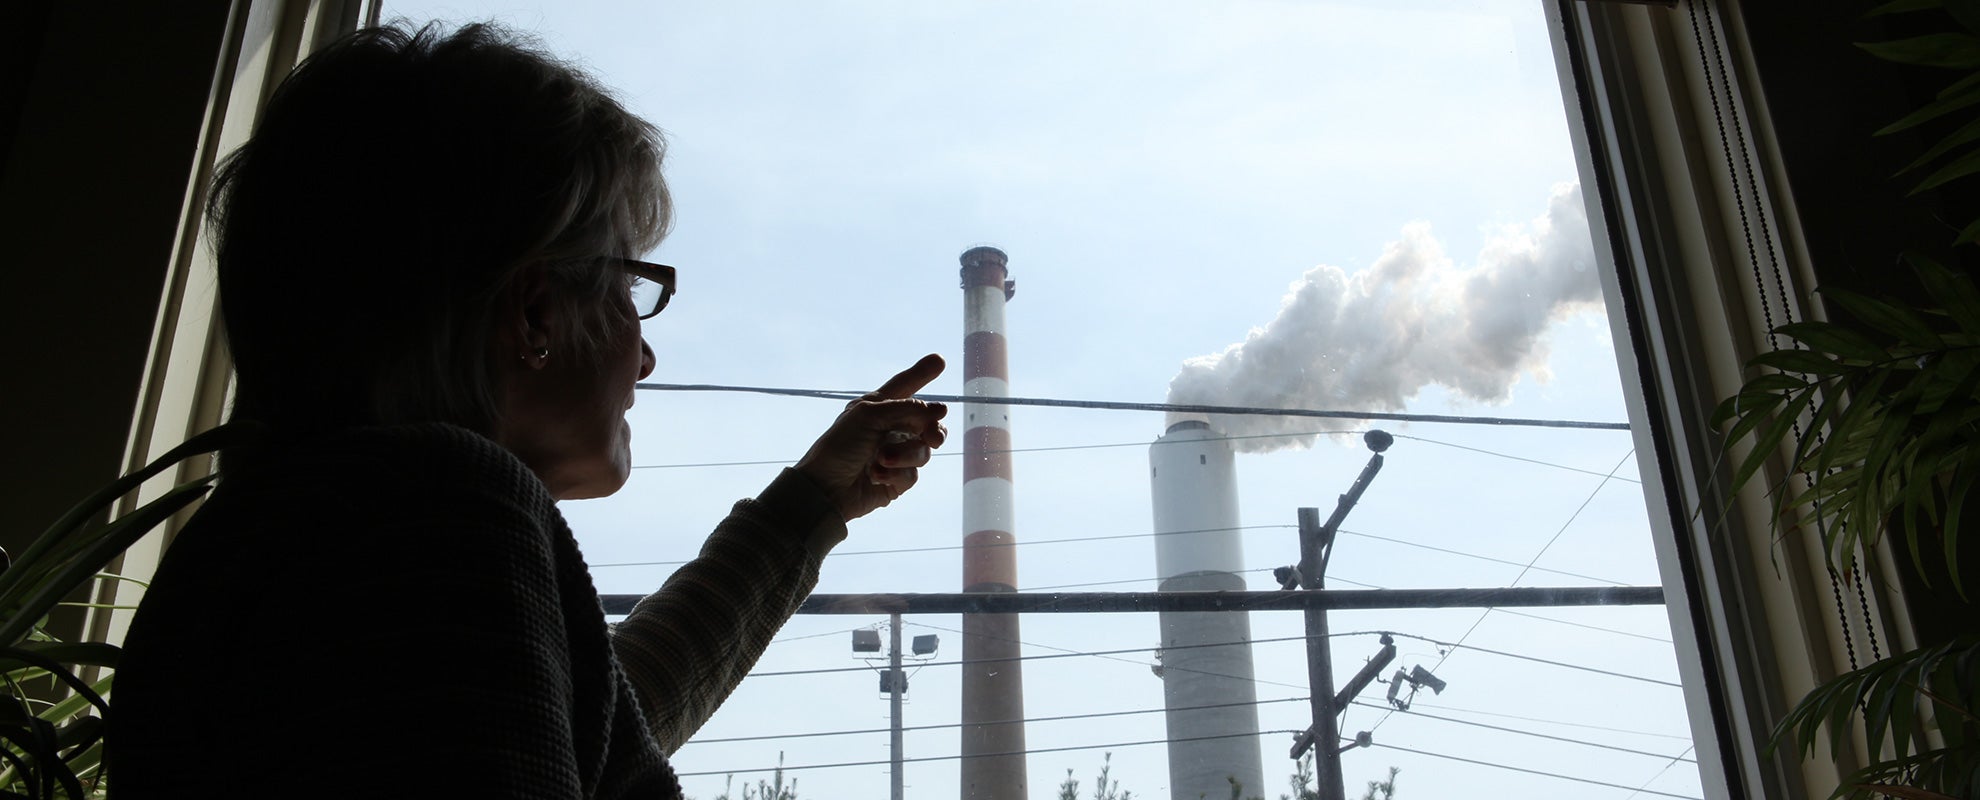 Marti Blake watched the Cheswick Generating Station from her home in Springdale, PA.